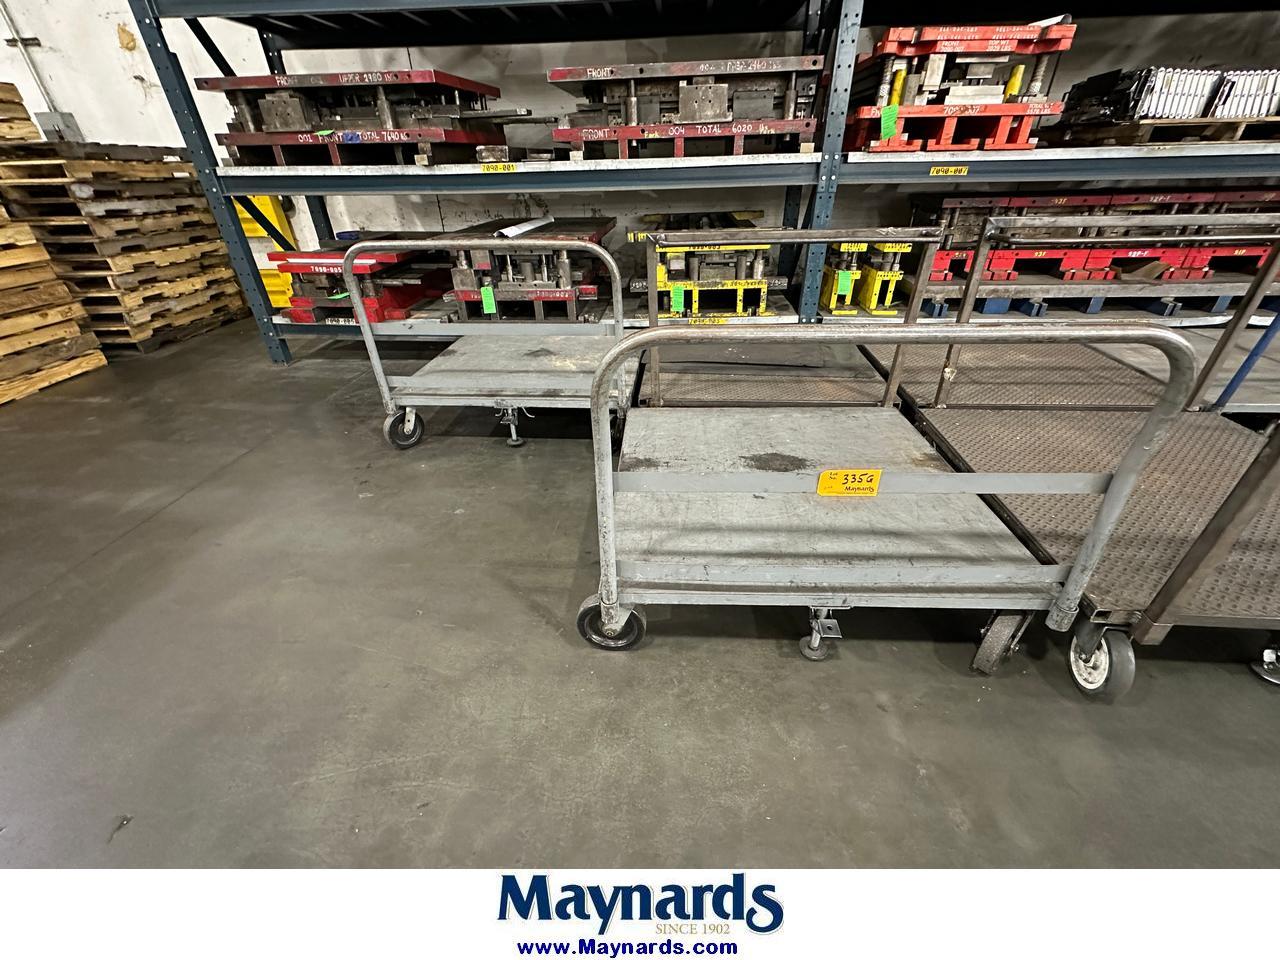 (3) 48"x48" Rolling Carts